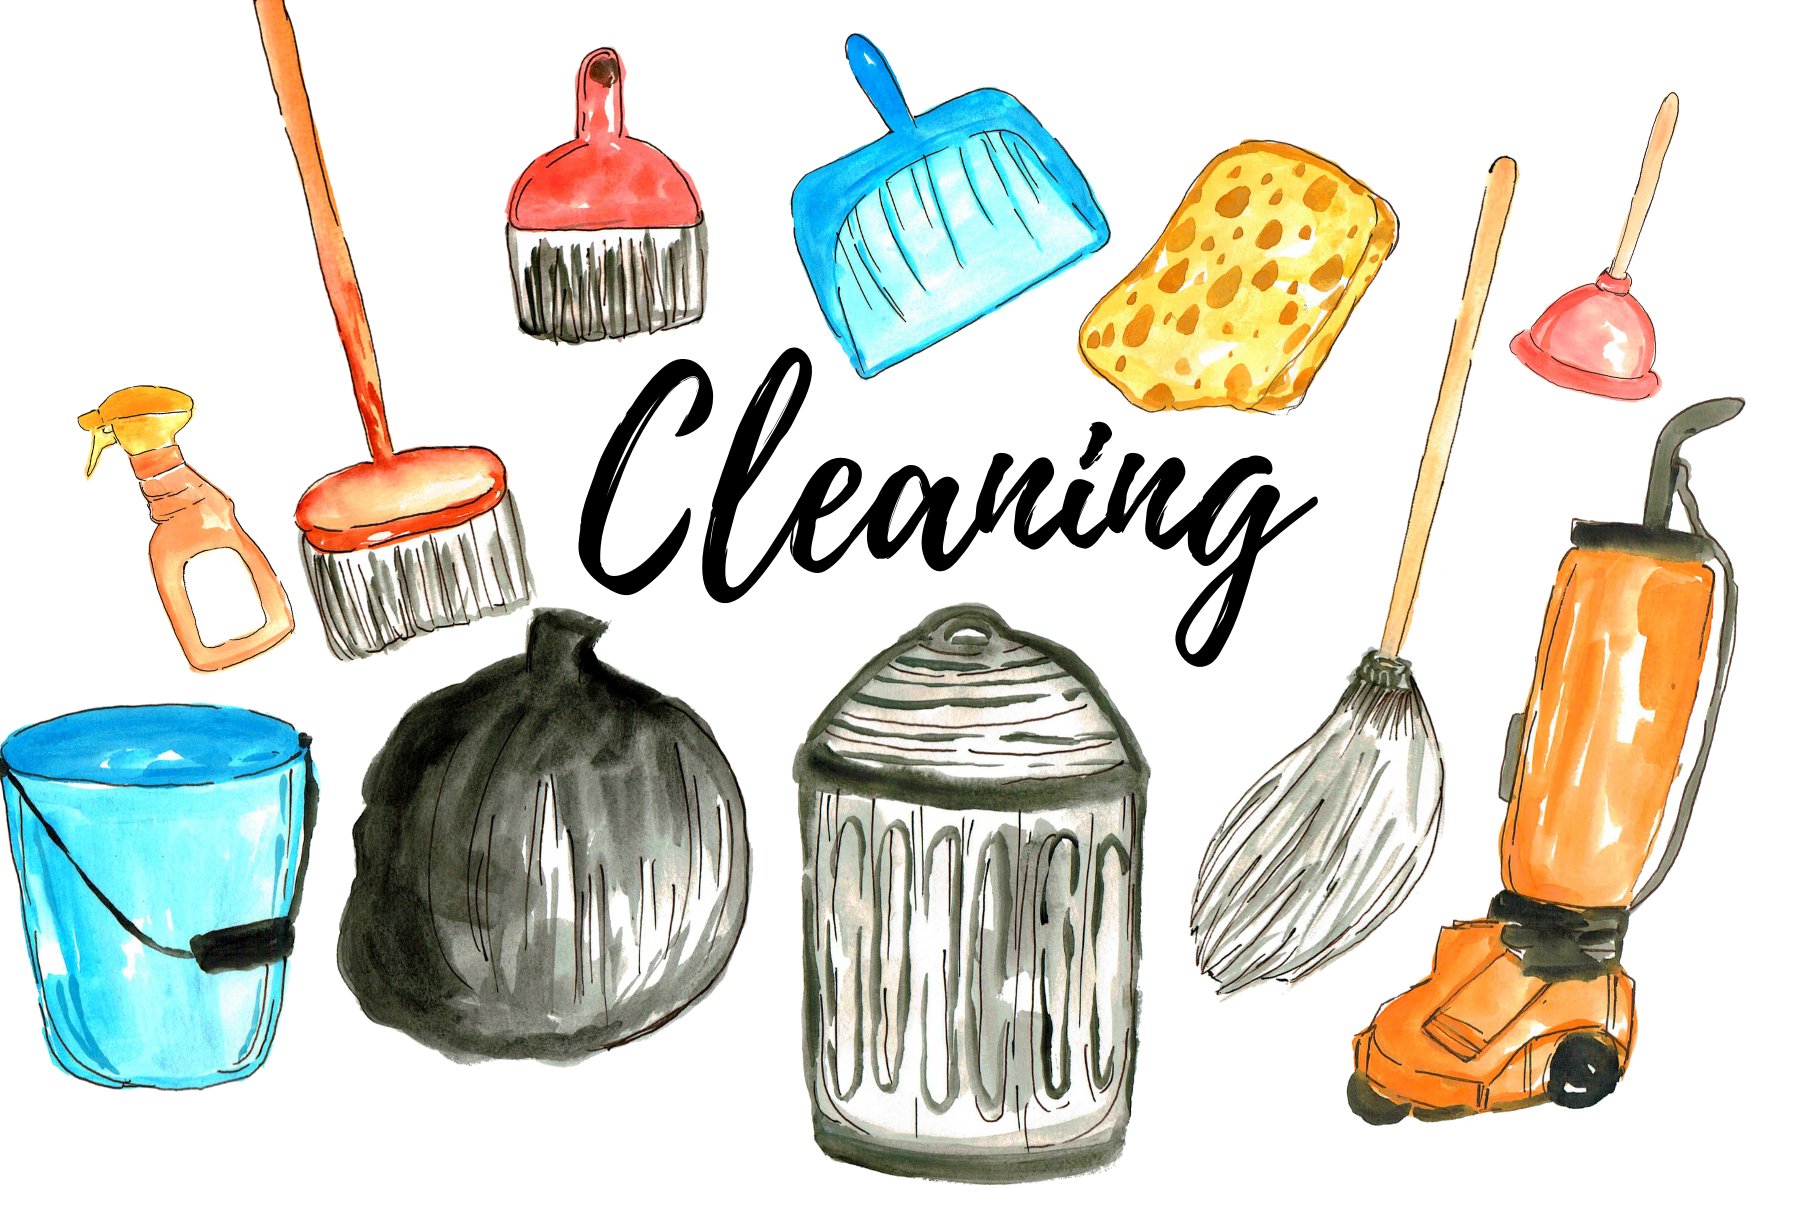 Watercolor Cleaning Clipart cover image.